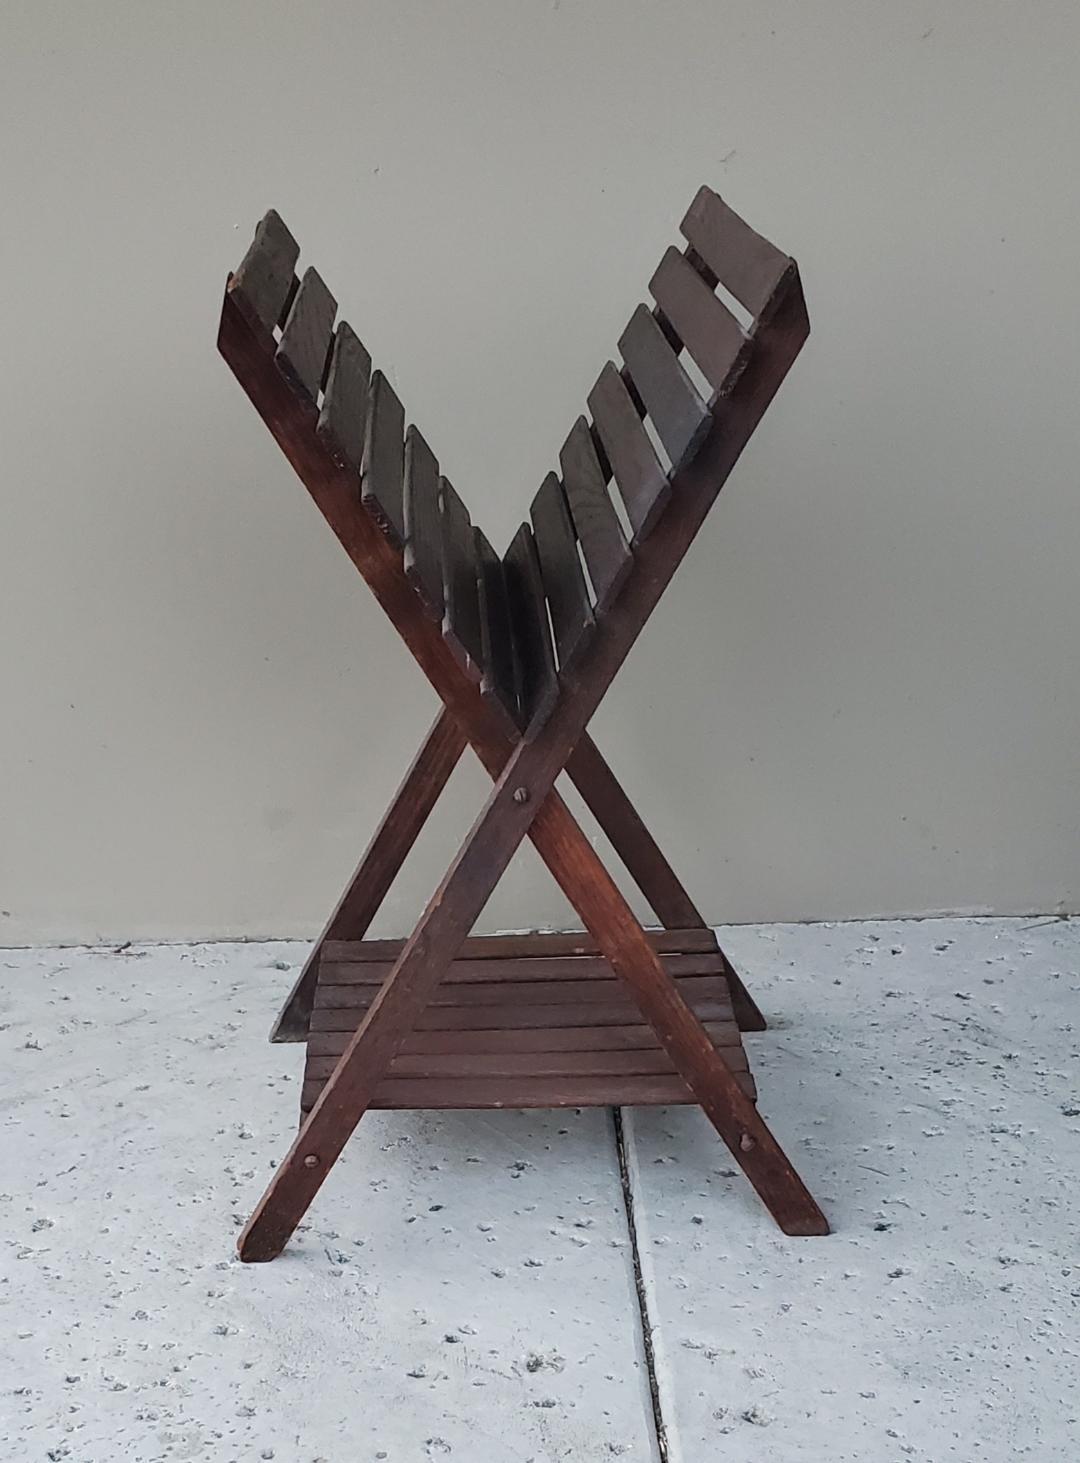 This Is An Old Oak Craftsman Magazine Rack Or Book Stand From The 1920s  With A Bottom Platform Or Shelf.
Beautiful Oak Wooden Book Stand Or Magazine Rack  Has A Dark Stain. 
This Book Stand Or Magazine Rack Stands Upright And Does Not Fold Or